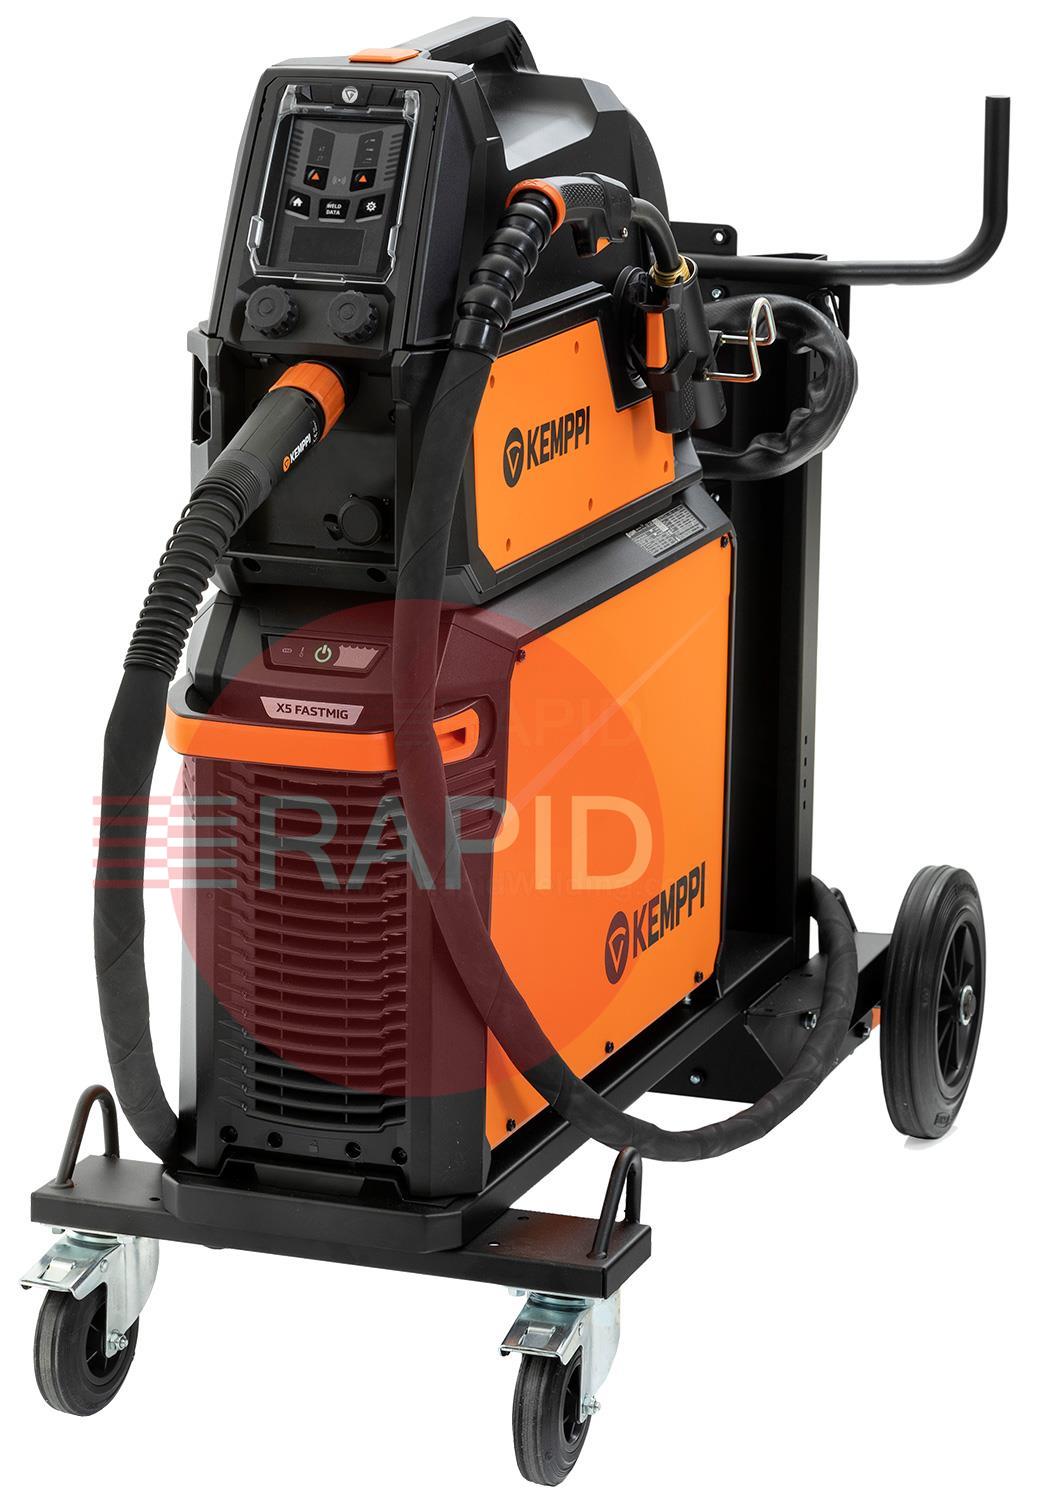 X5110400000MPKAC  Kemppi X5 FastMig 400 Manual Air Cooled MIG Package, with GXe 405G 3.5m Torch - 400v, 3ph